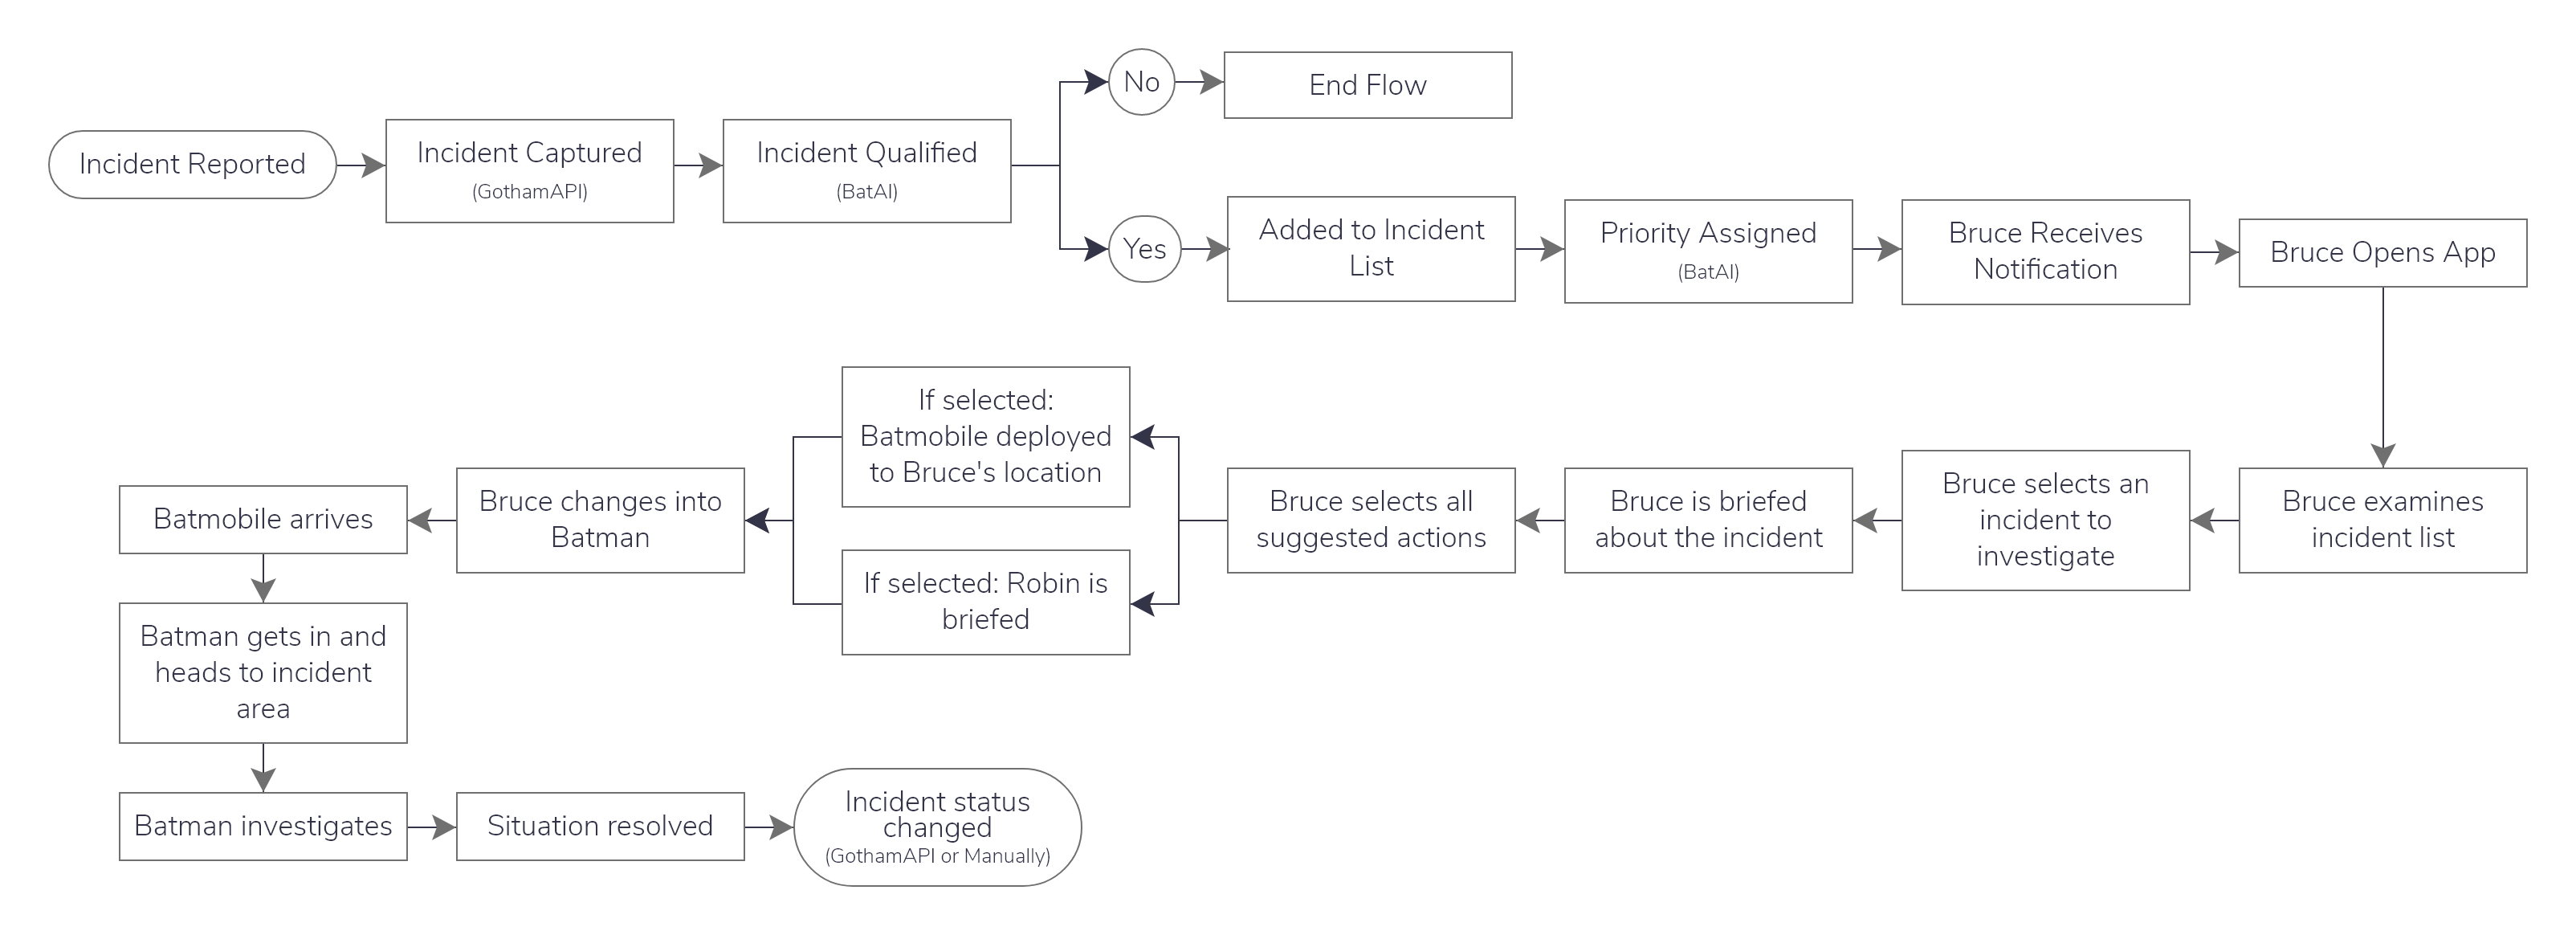 A diagram showing how BatAI might decide which case to notify or bring to the attention of Bruce